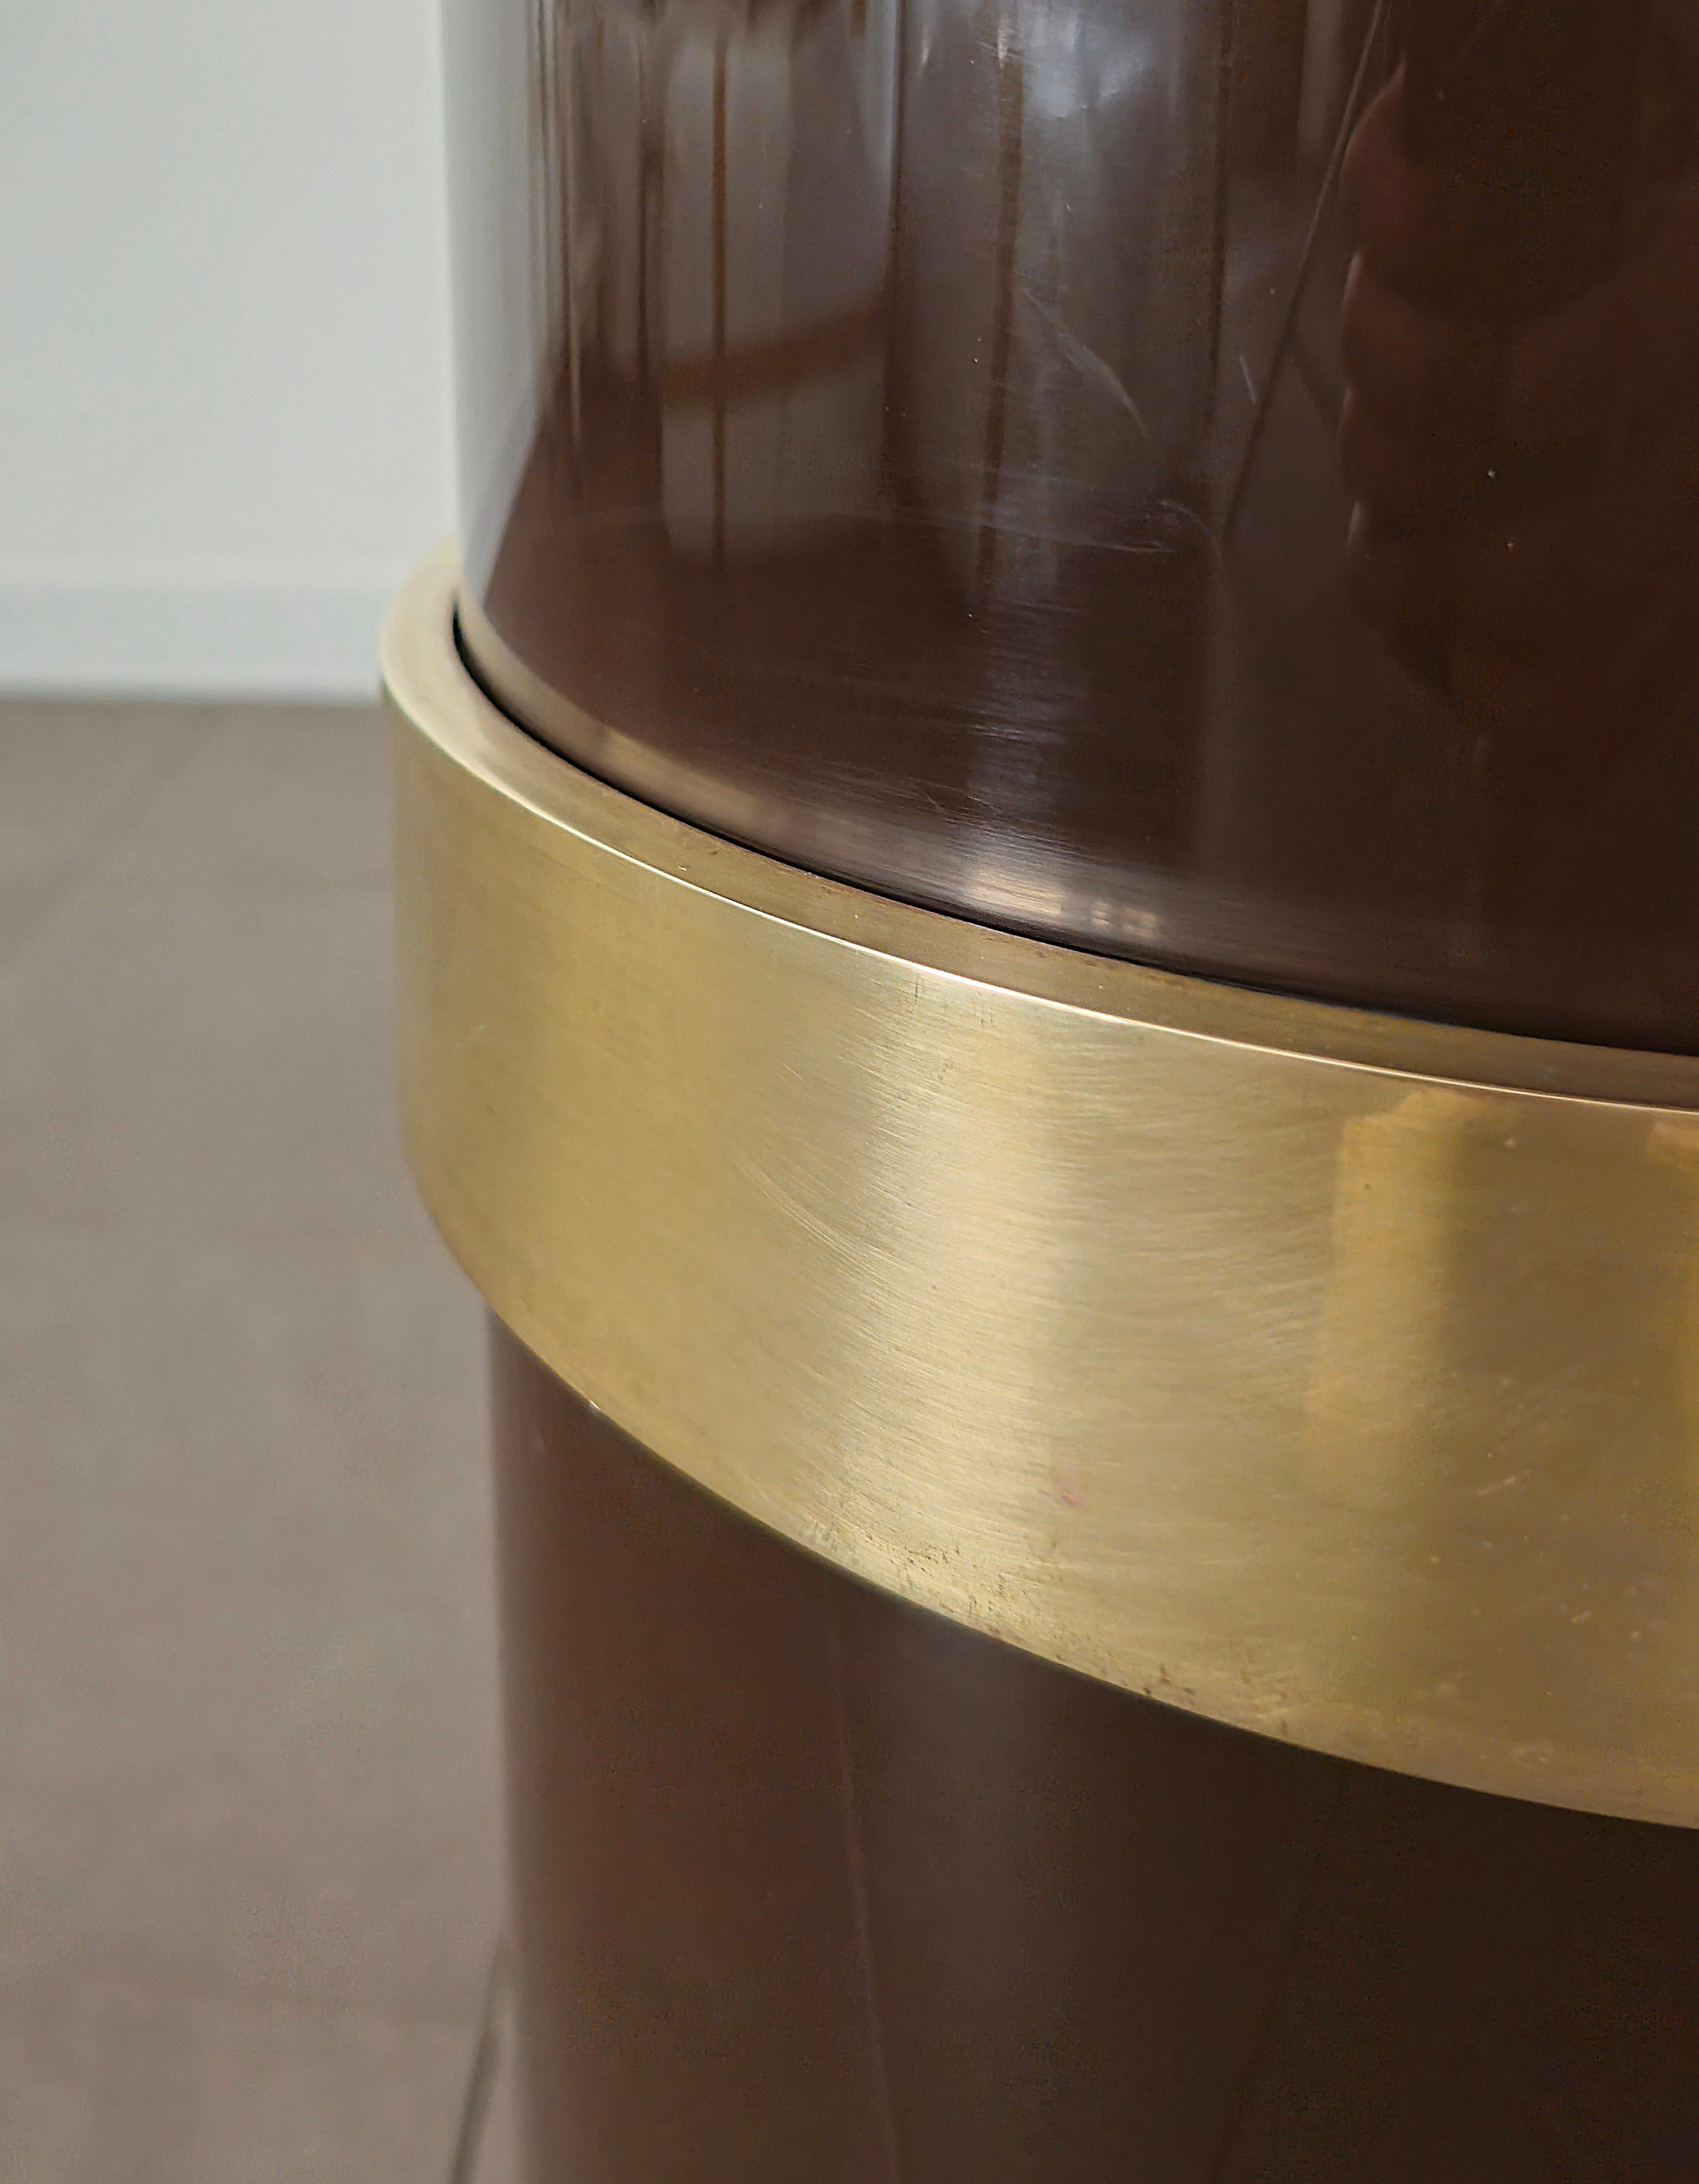 Rare cylindrical umbrella stand of considerable size made of plastic/plexiglass in shades of chocolate brown with a large central band in brass, which gives that touch of particularity to the object. Made in Italy in the 70s.



Note: We try to